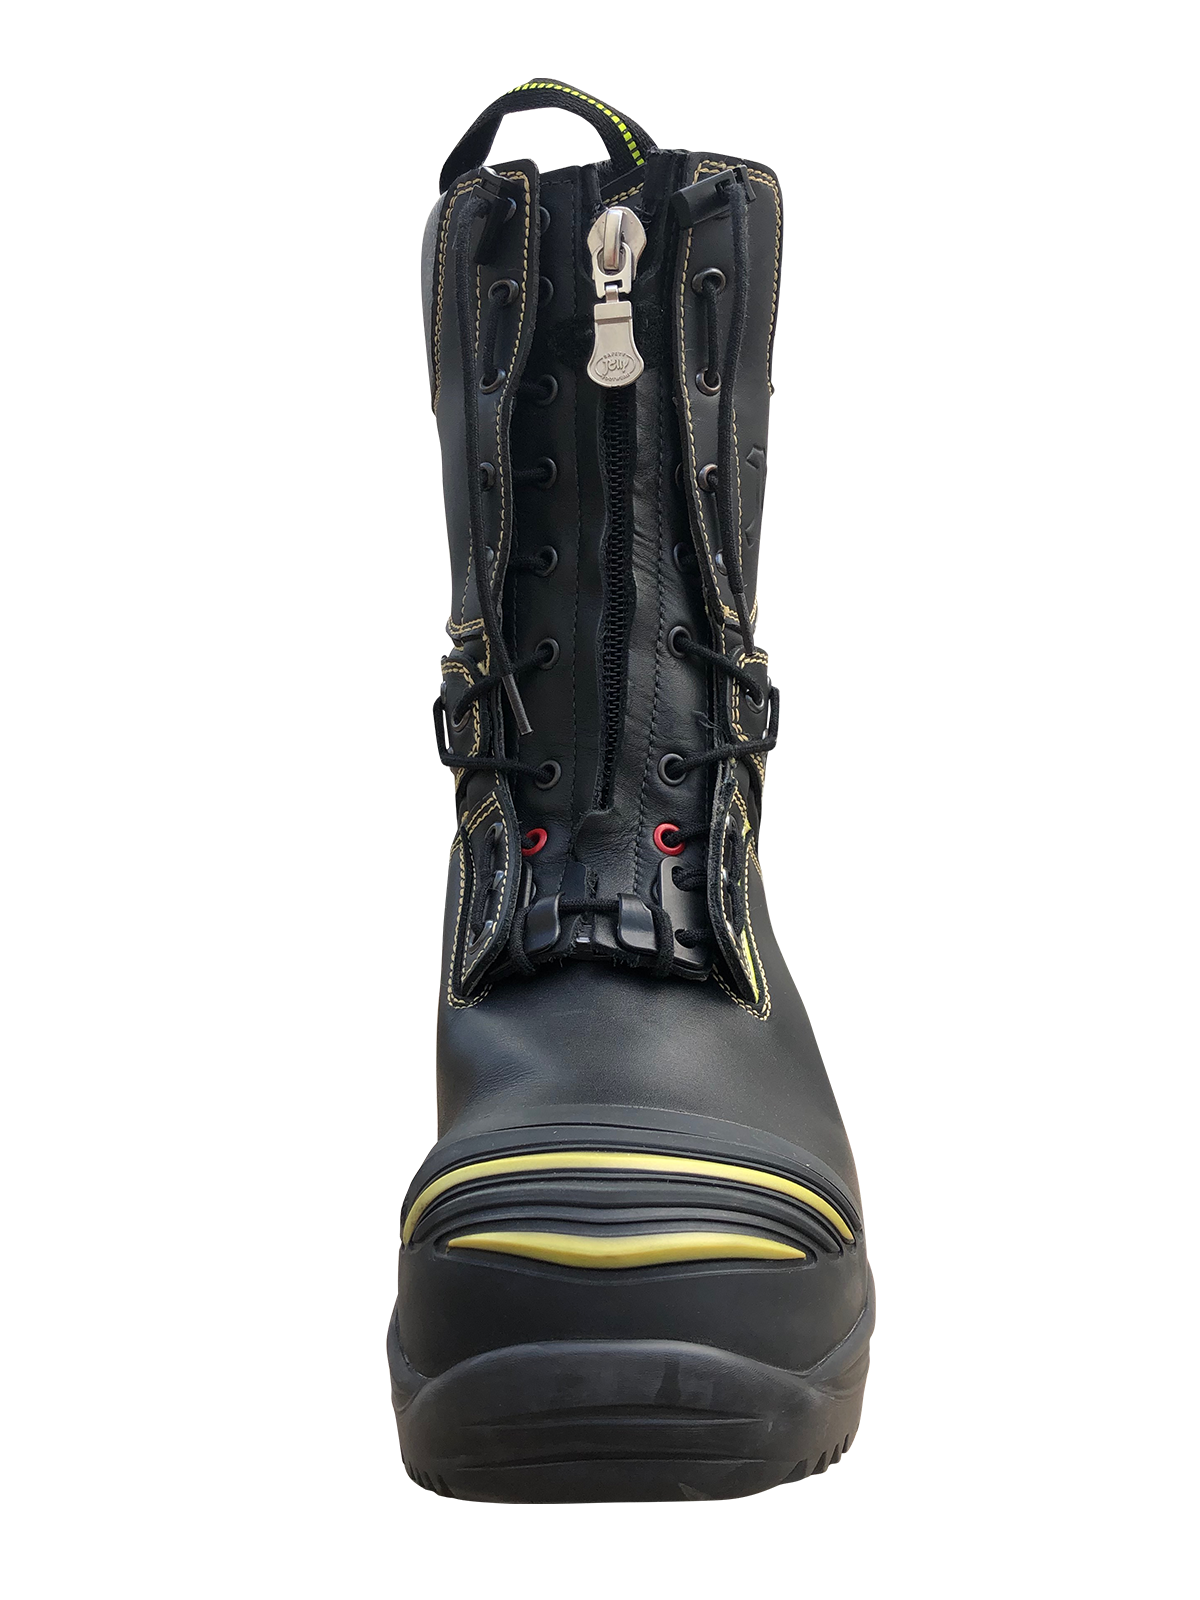 Fire Guard Structural Firefighting Boots | Pac Fire Australia